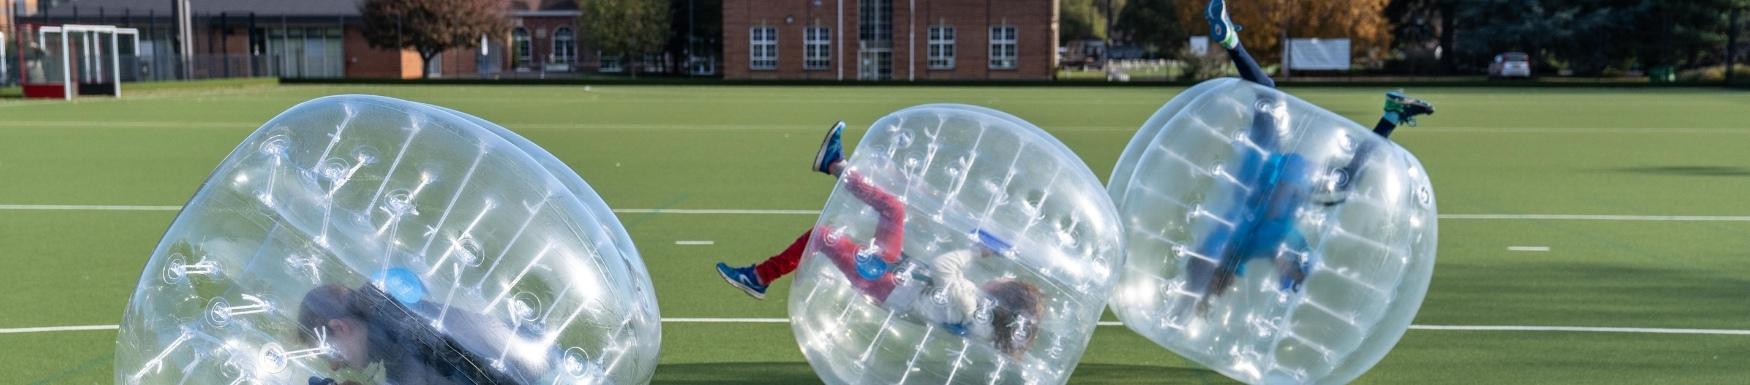 Summer camps with zorbs 